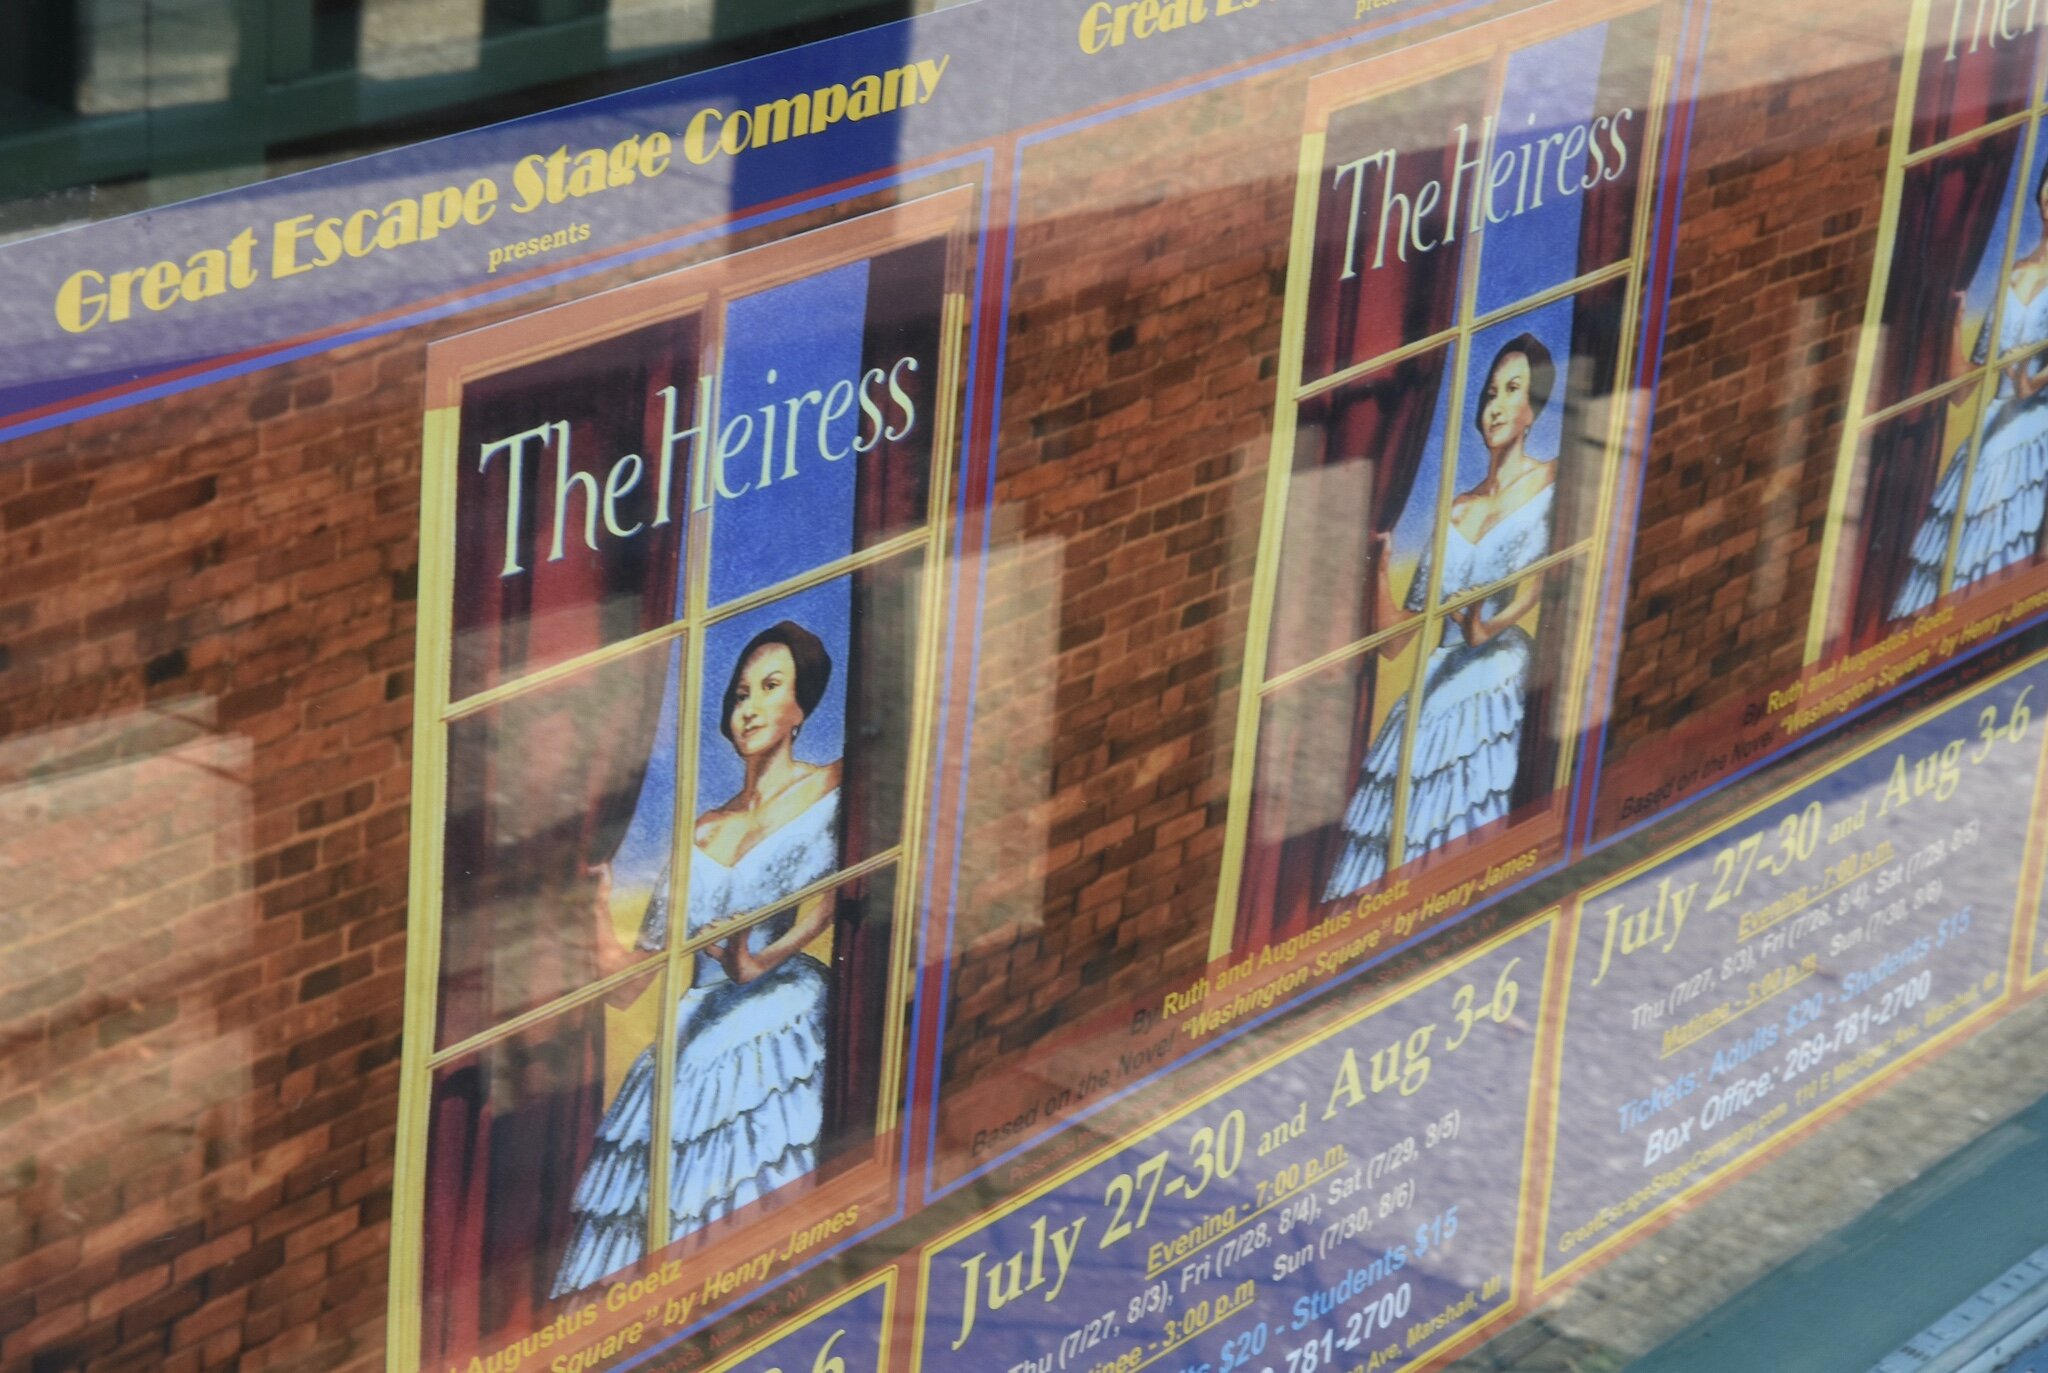 “The Heiress” is the next production of Marshall’s Great Escape Stage Company.